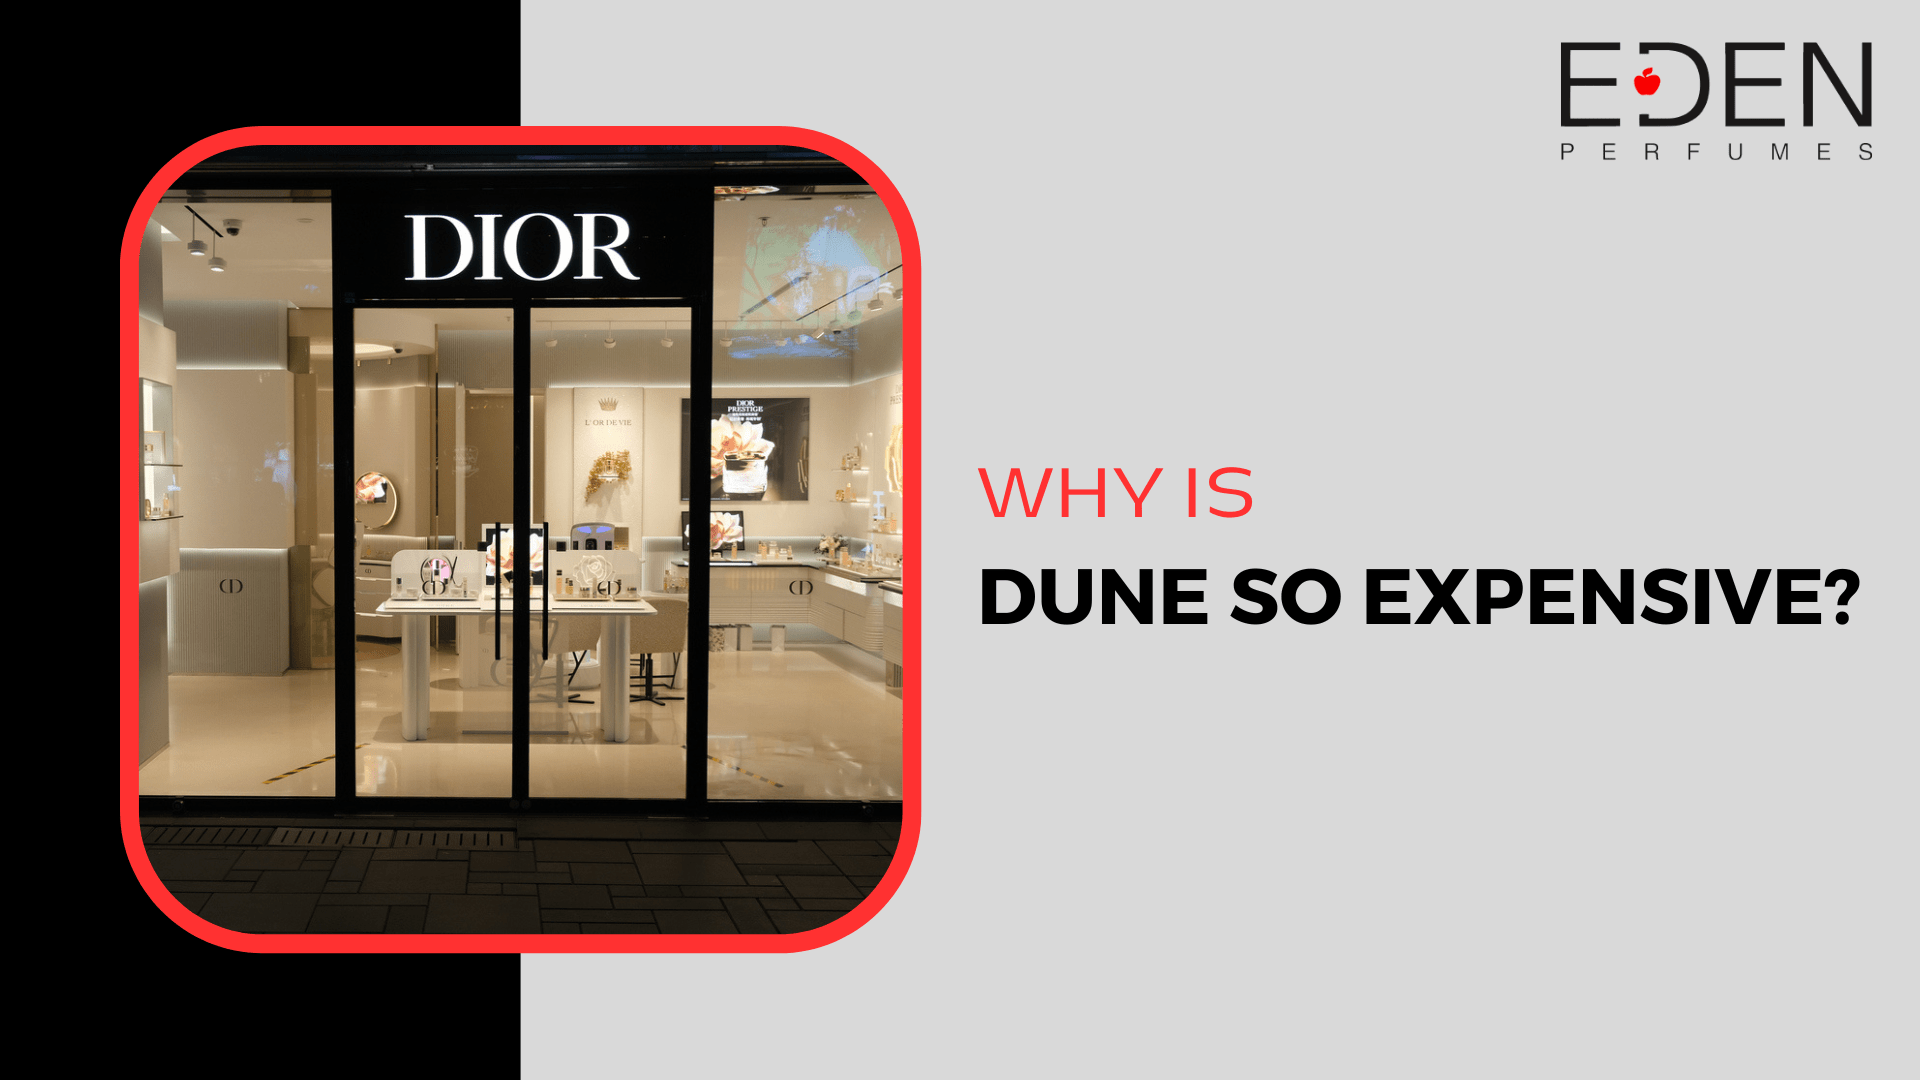 Why is Dune so expensive?